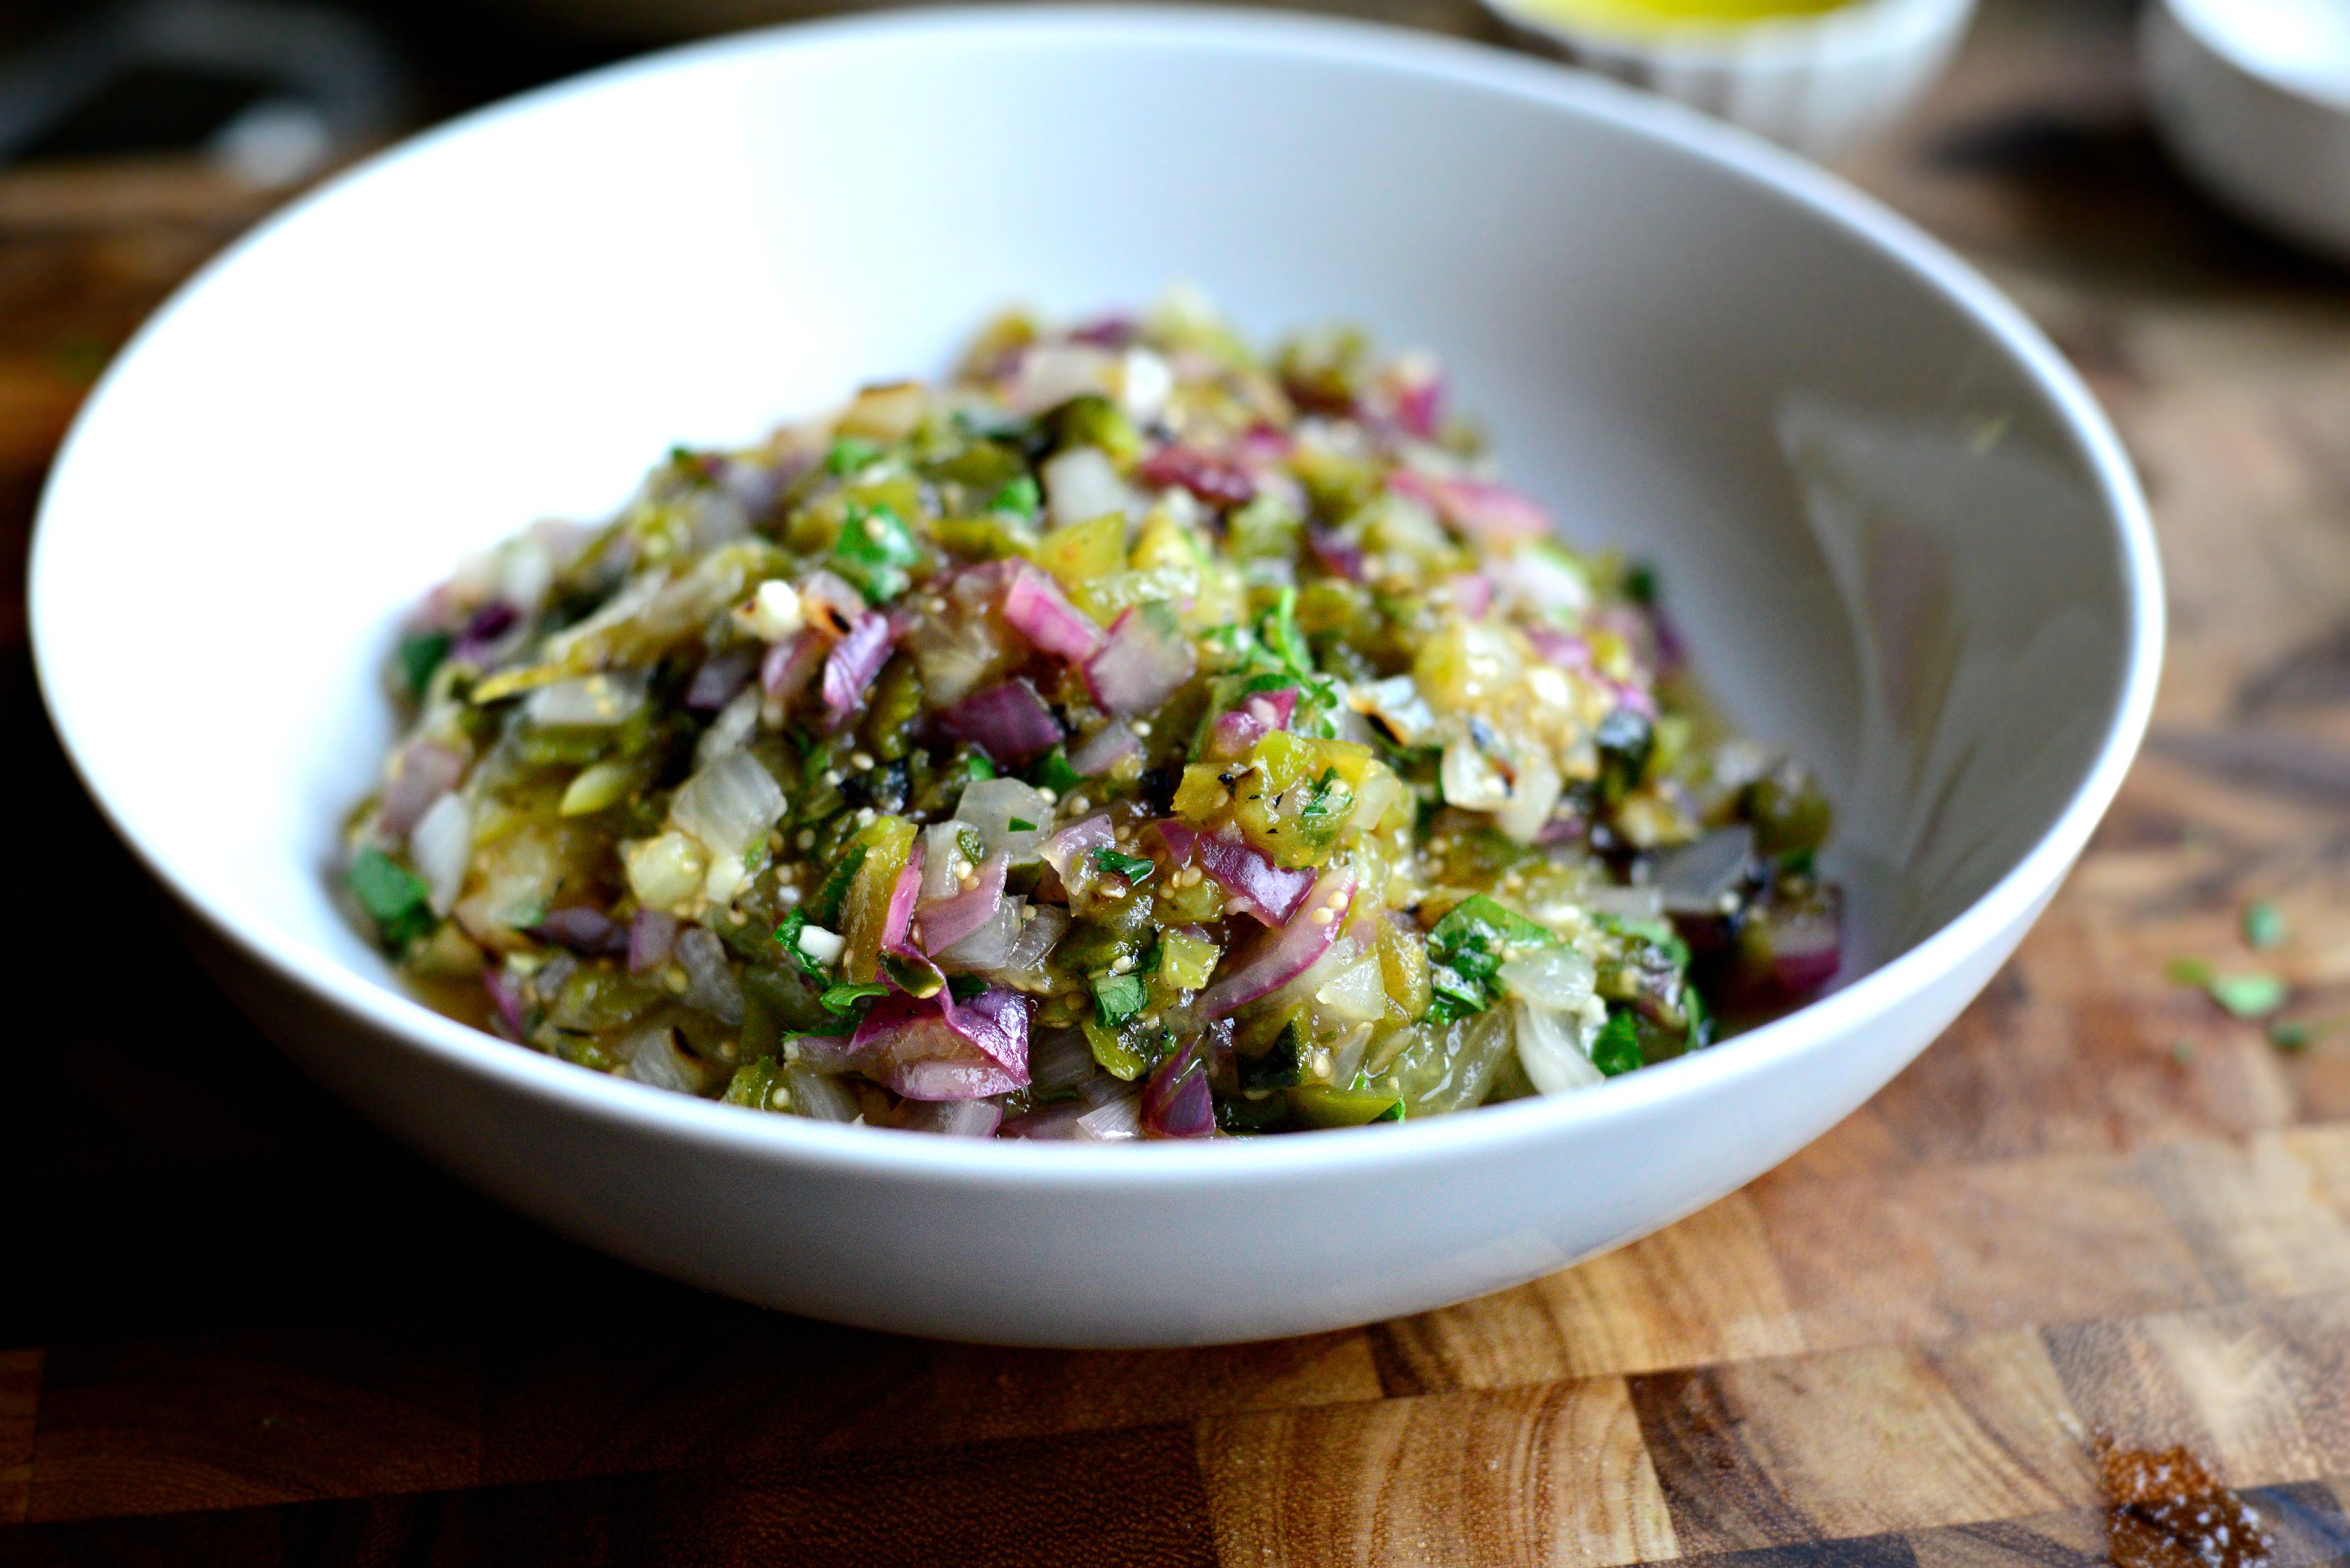 Simply Scratch Hand-Chopped Grilled Tomatillo Salsa - Simply Scratch